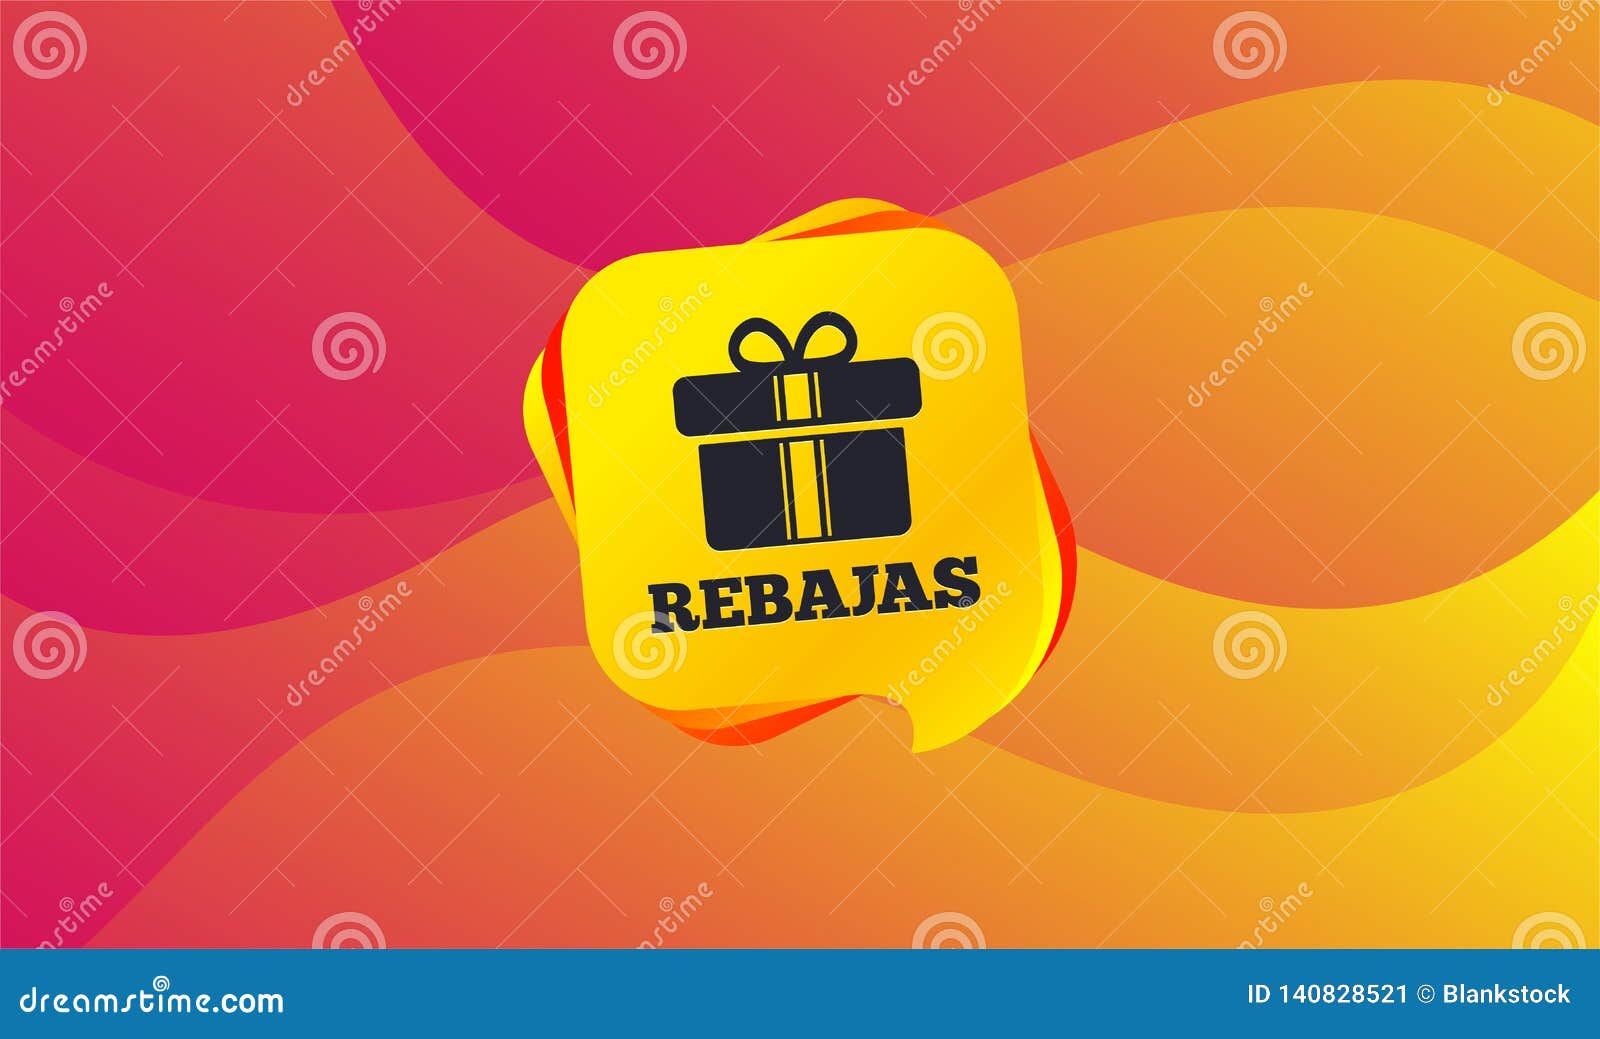 rebajas - discounts in spain sign icon. gift. 